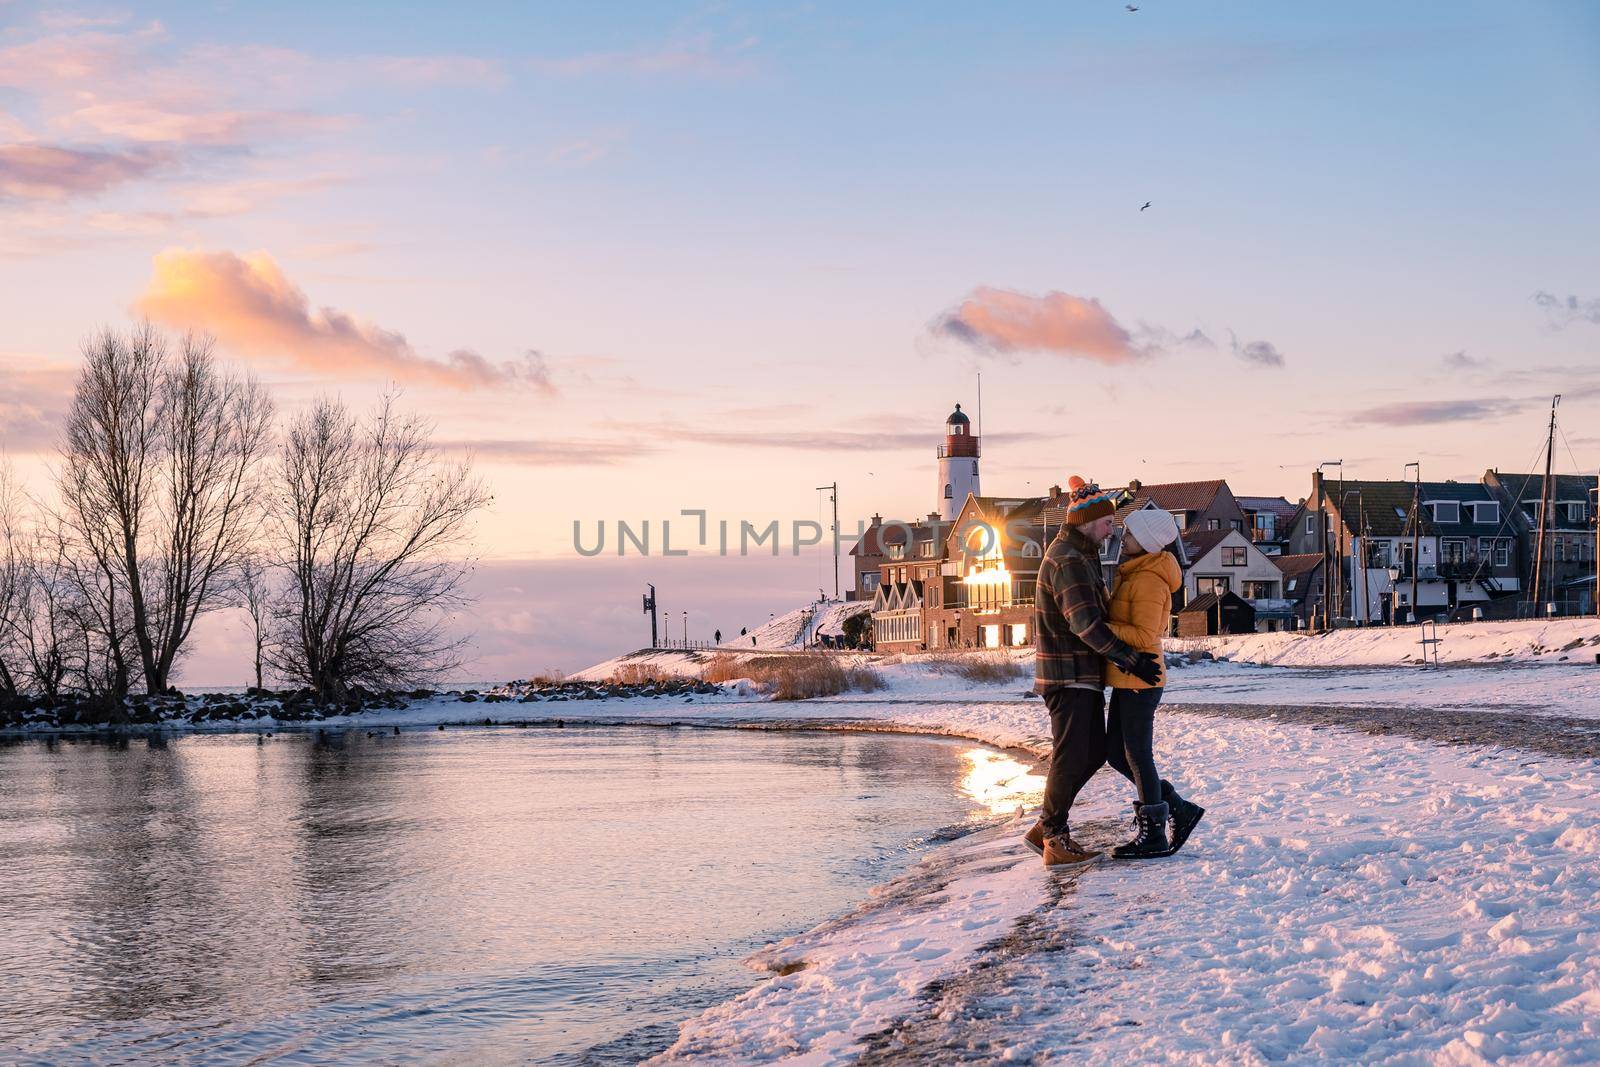 couple men and woman by the lighthouse of Urk Netherlands during winter in the snow. Winter weather in the Netherlands by Urk